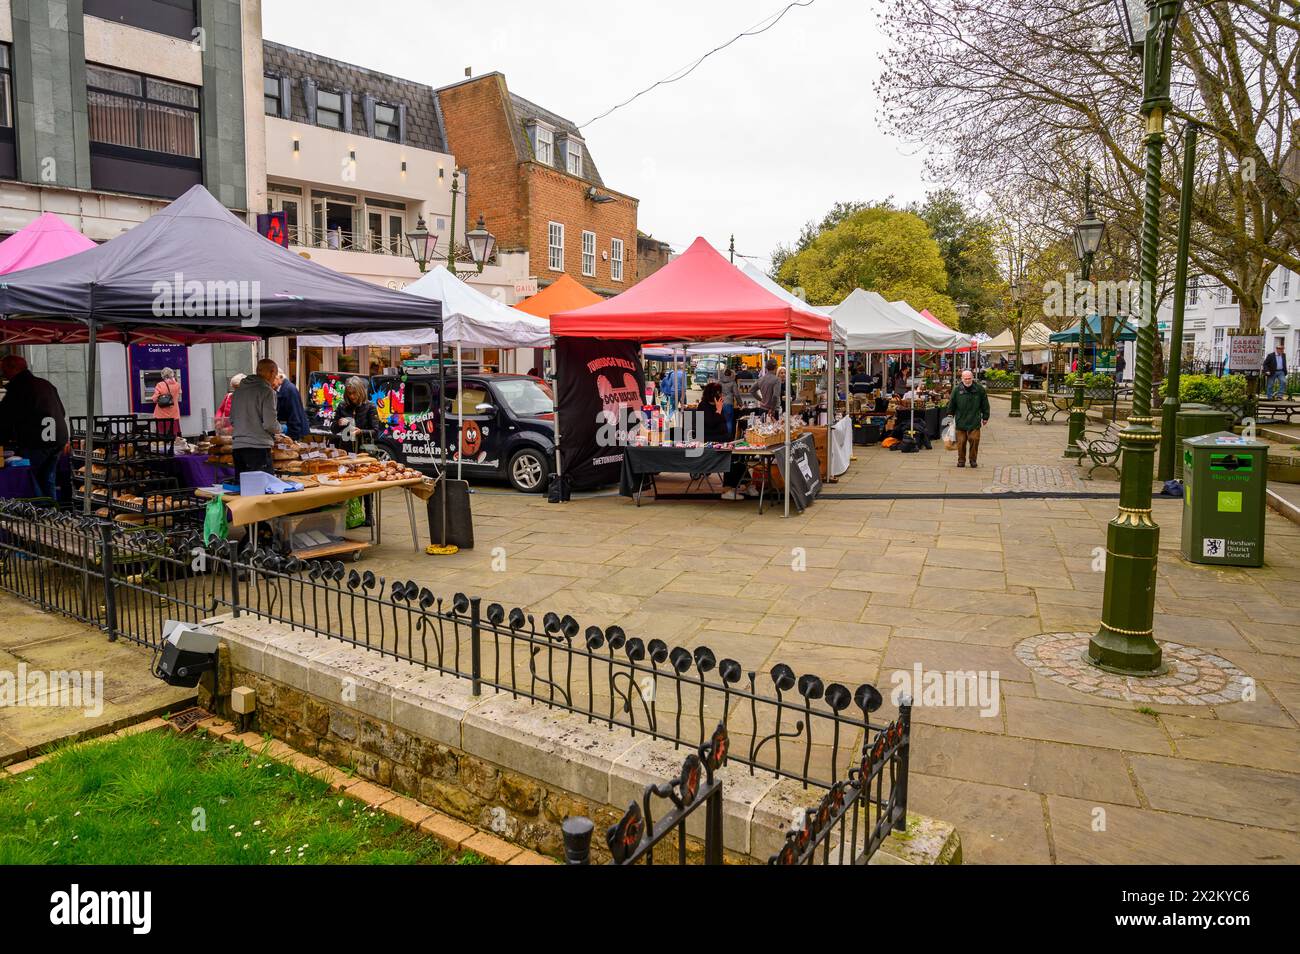 Market stalls and shoppers at the Saturday open air market at Carfax in Horsham, West Sussex, England. Stock Photo